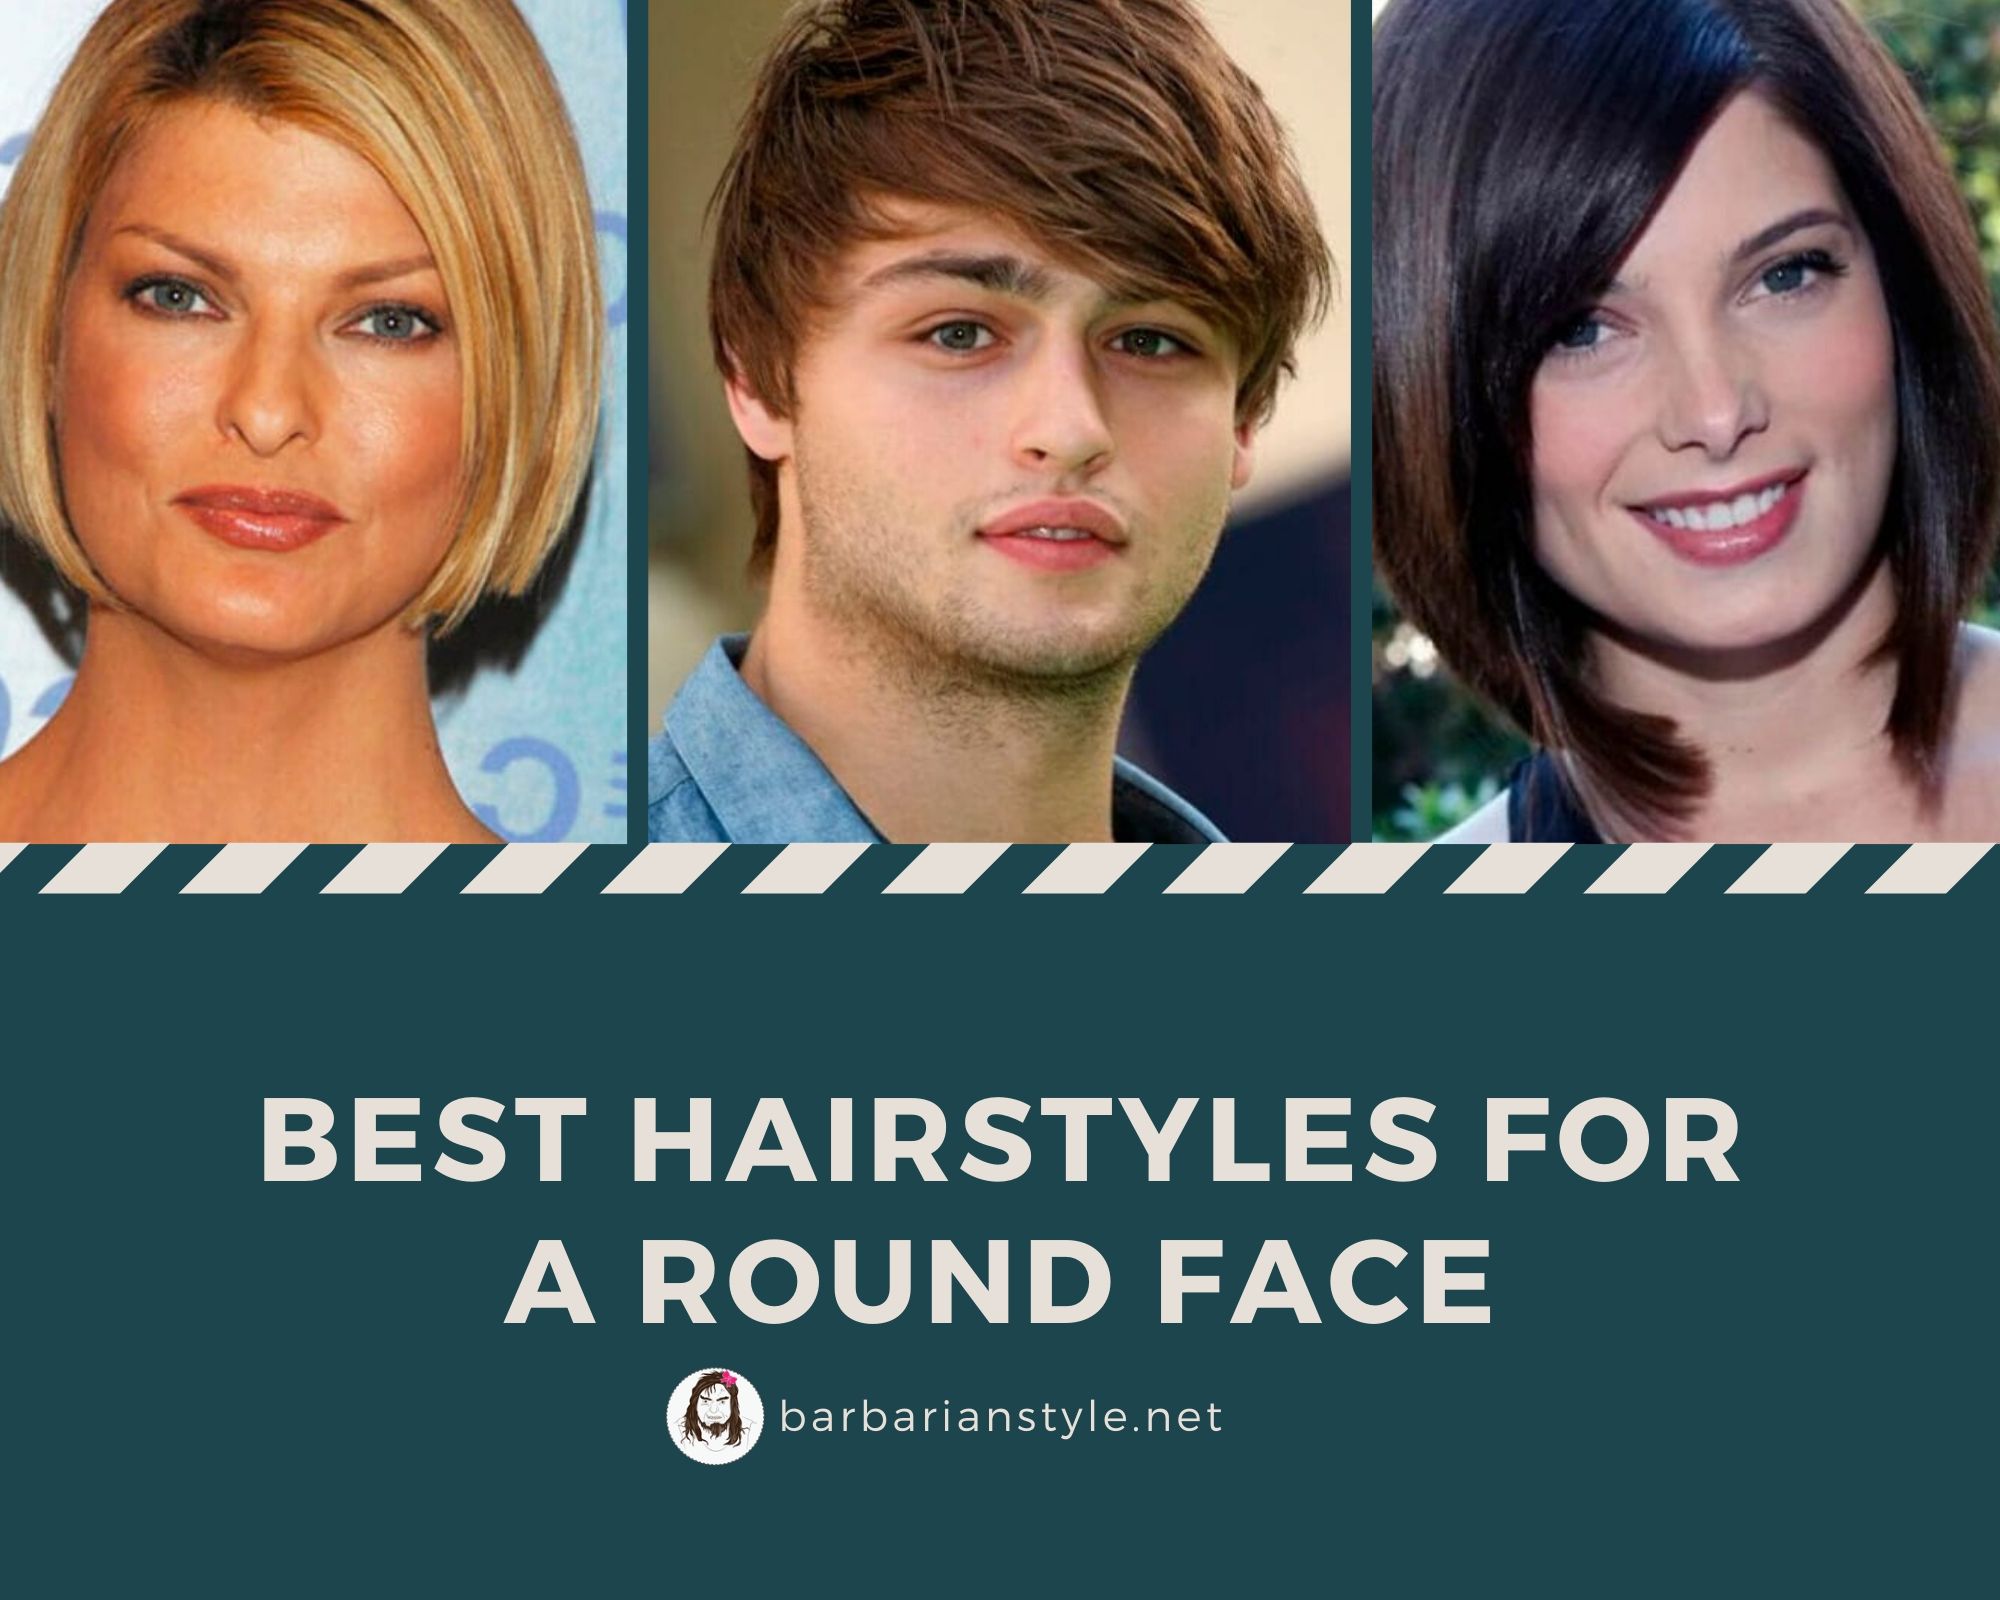 Best Hairstyles for Round Faces in 2021 for the Attractive Look